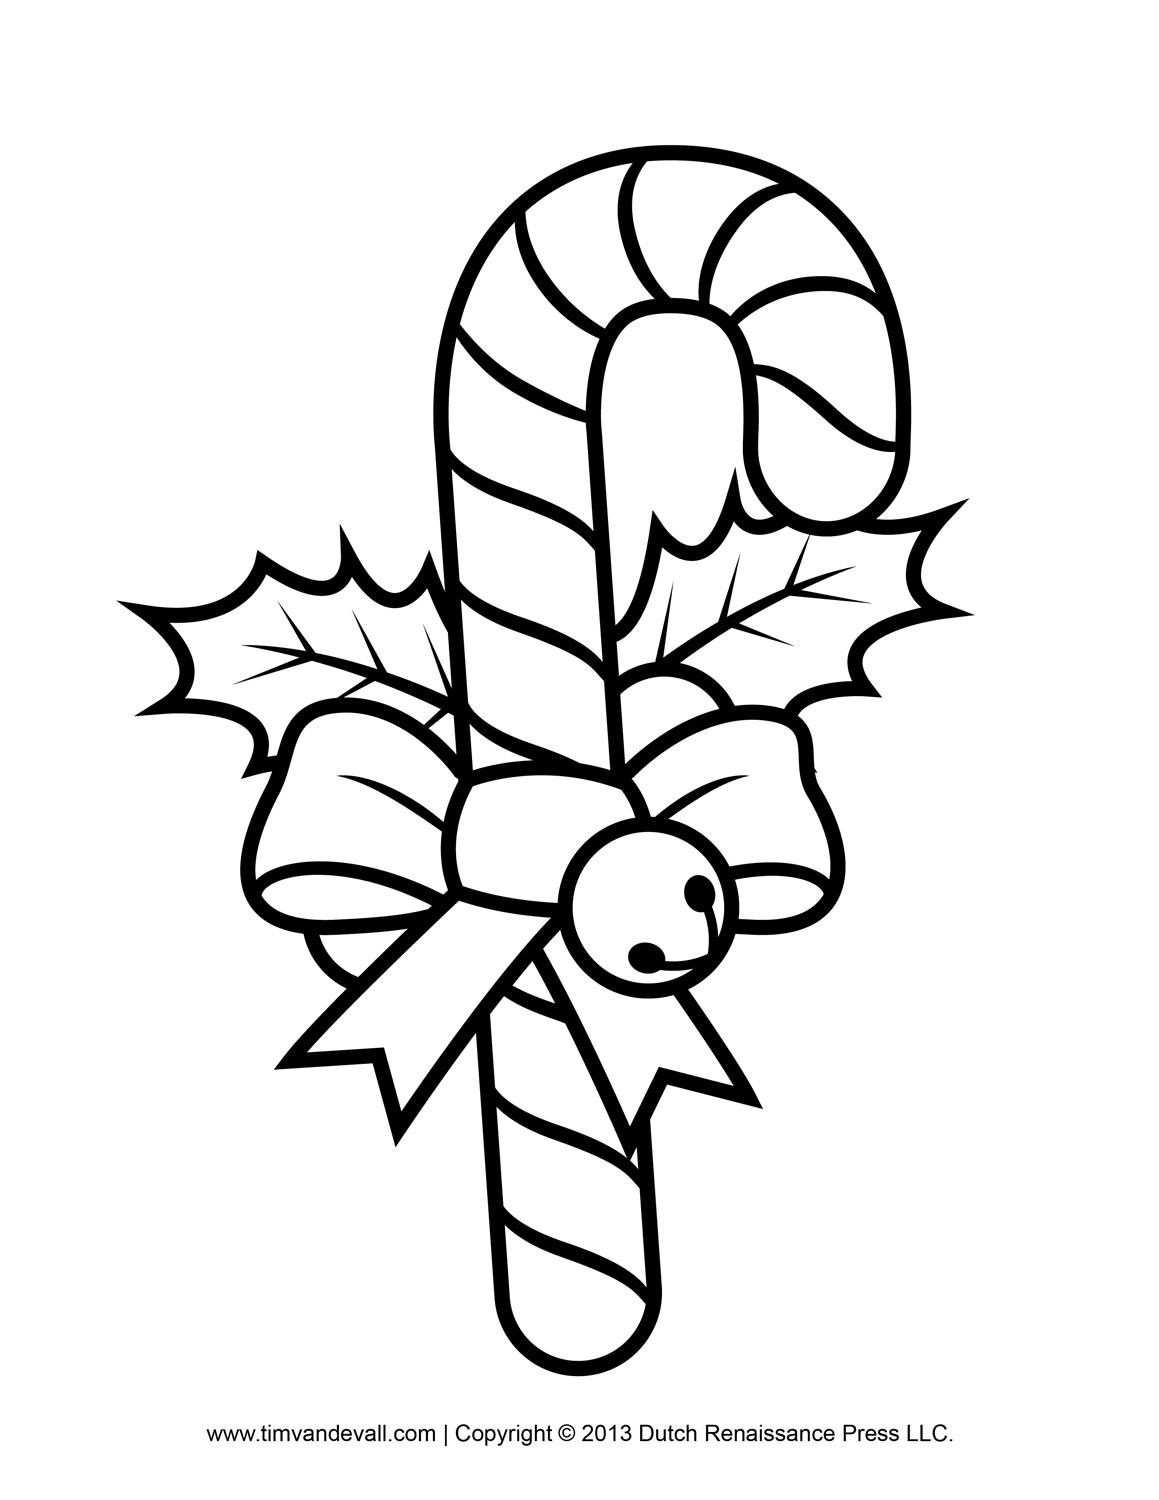 Enjoy Coloring They May Like These Candy Cane Coloring Pages